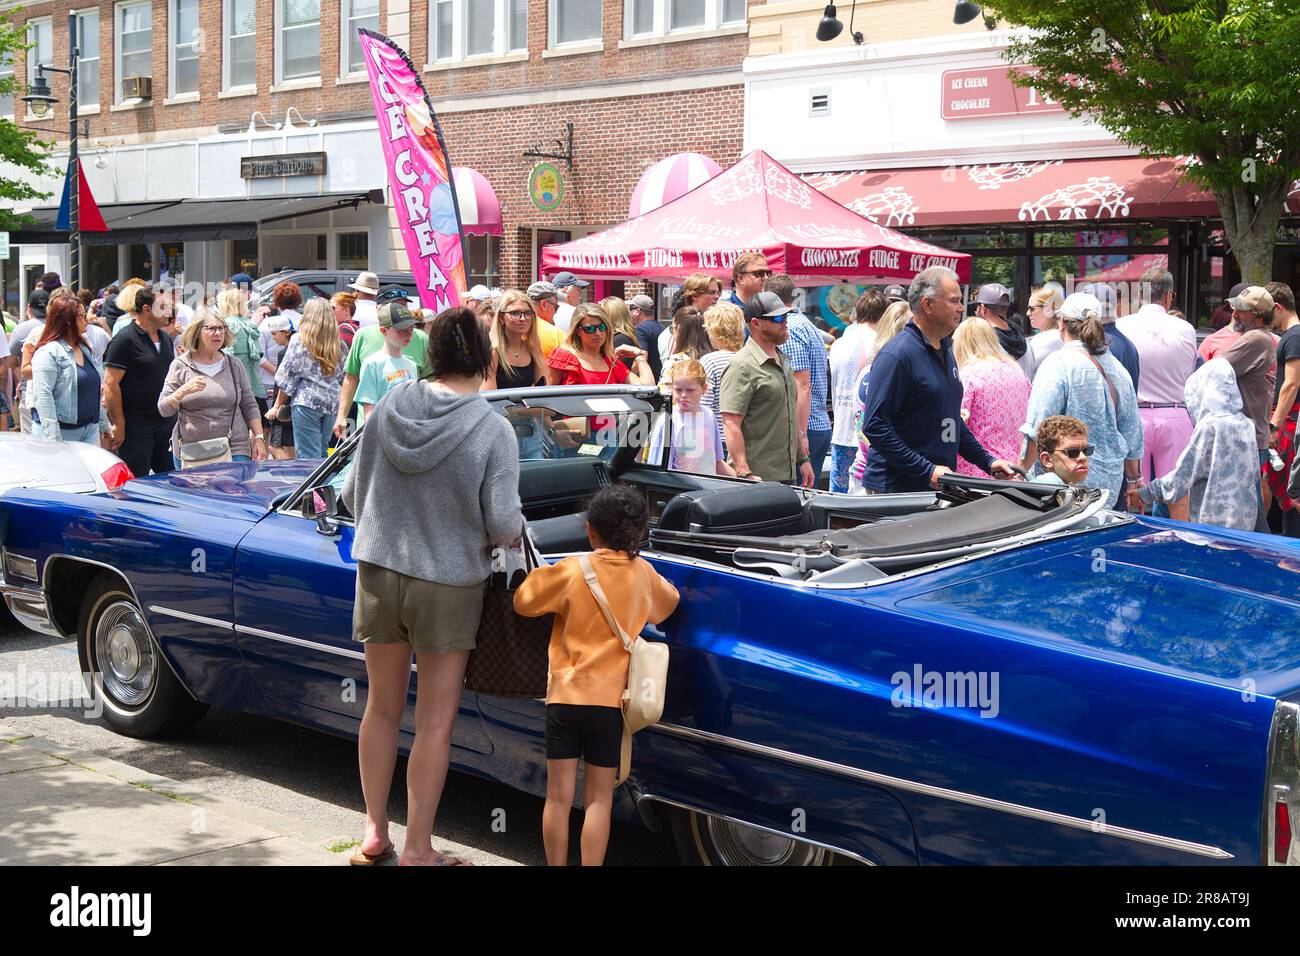 Father's Day Auto Show - Hyannis, Massachusetts, Cape Cod - USA. Looking over an automobile on display with the crowd in the background Stock Photo